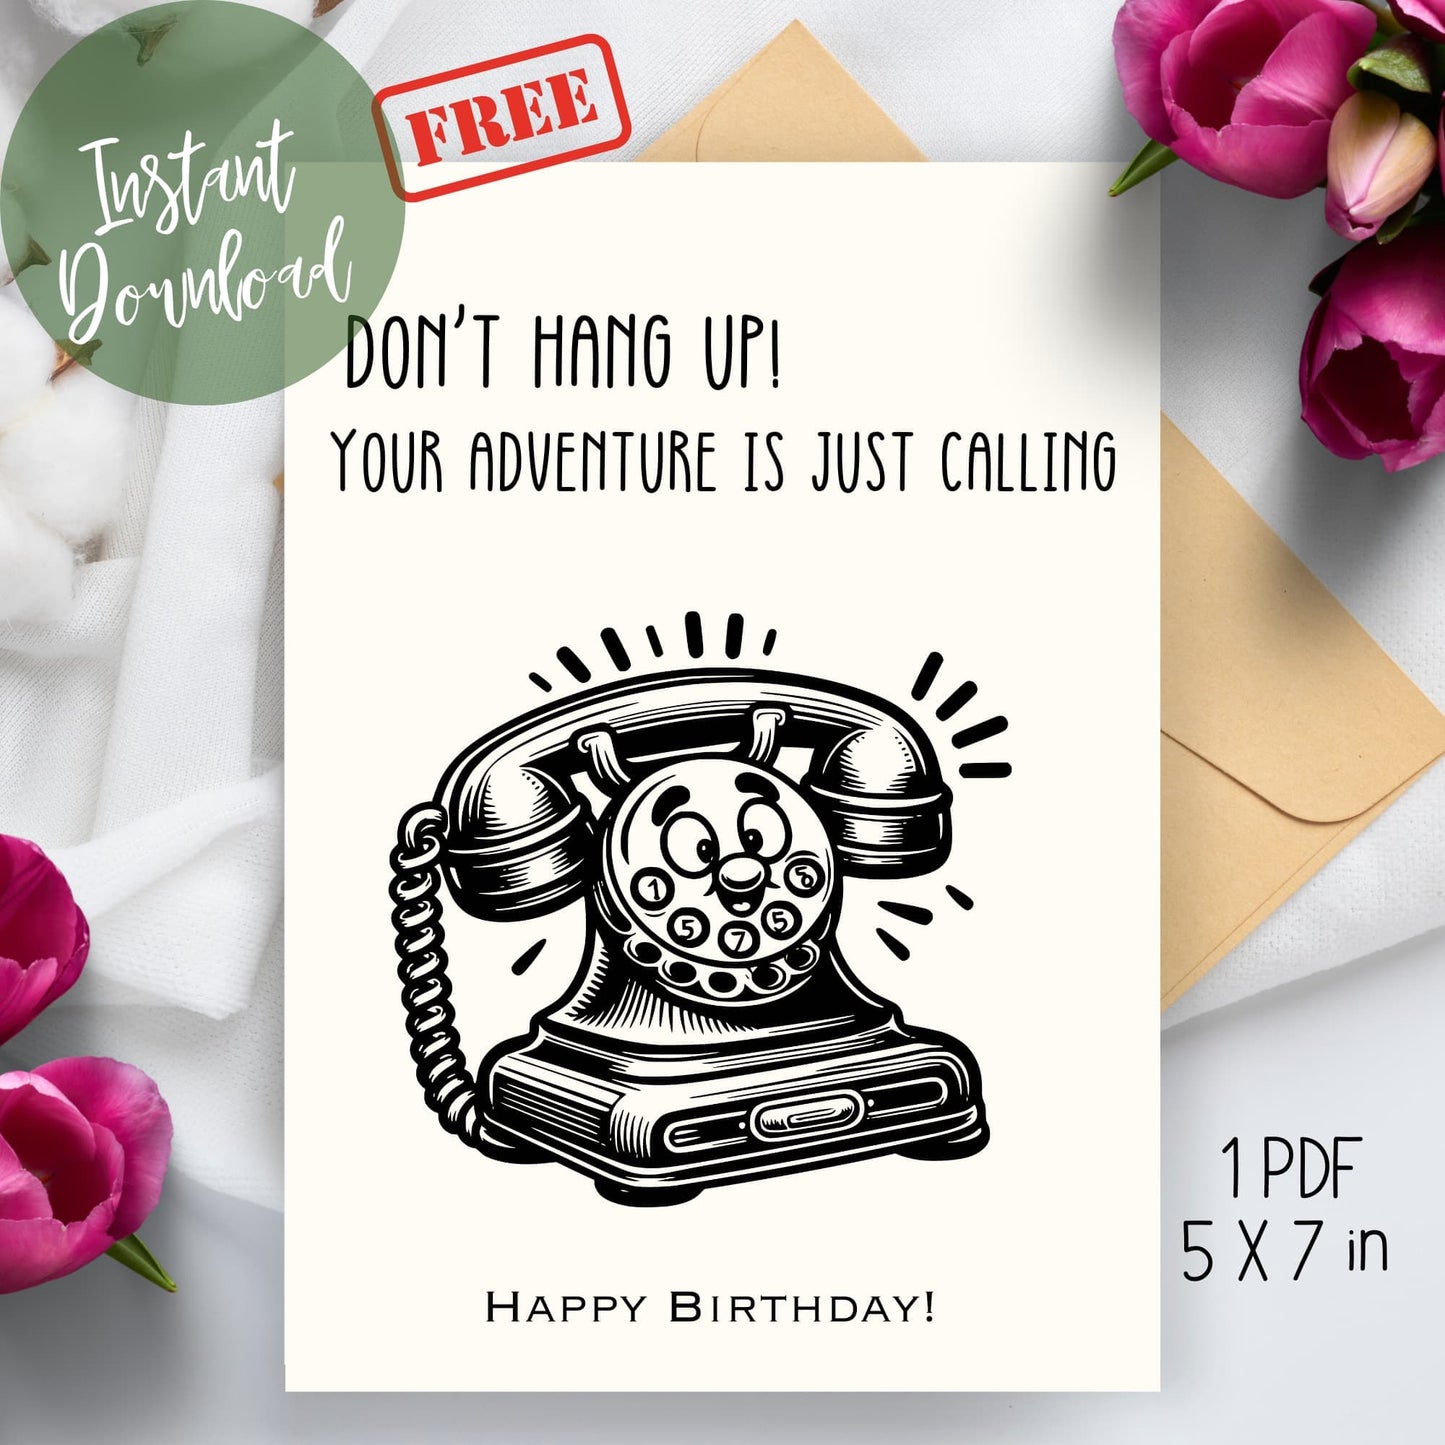 Printable Old-fashioned Telephone Birthday Card for Everyone mockup with flowers and envelope